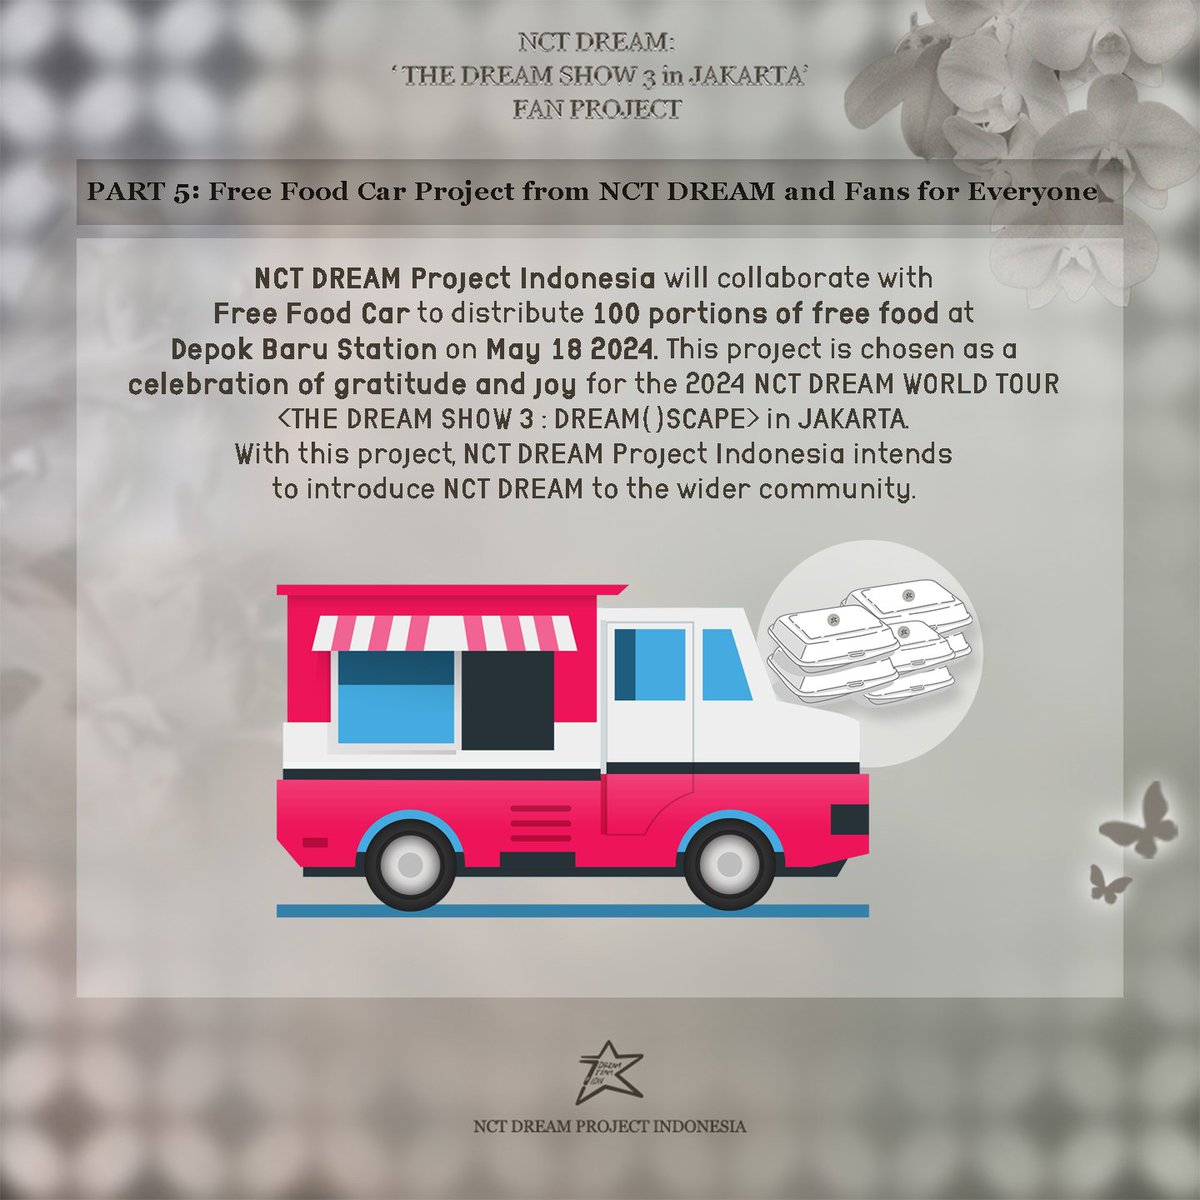 ‘THE DREAM SHOW 3: DREAM( )SCAPE in Jakarta’ FAN PROJECT Share The DREAM Love 💘 Part 5: Free Food Car Project dari NCT DREAM & Fans #NCTDREAM_THEDREAMSHOW3_JAKARTA #THEDREAMSHOW3INJKT #TDS3INJAKARTA